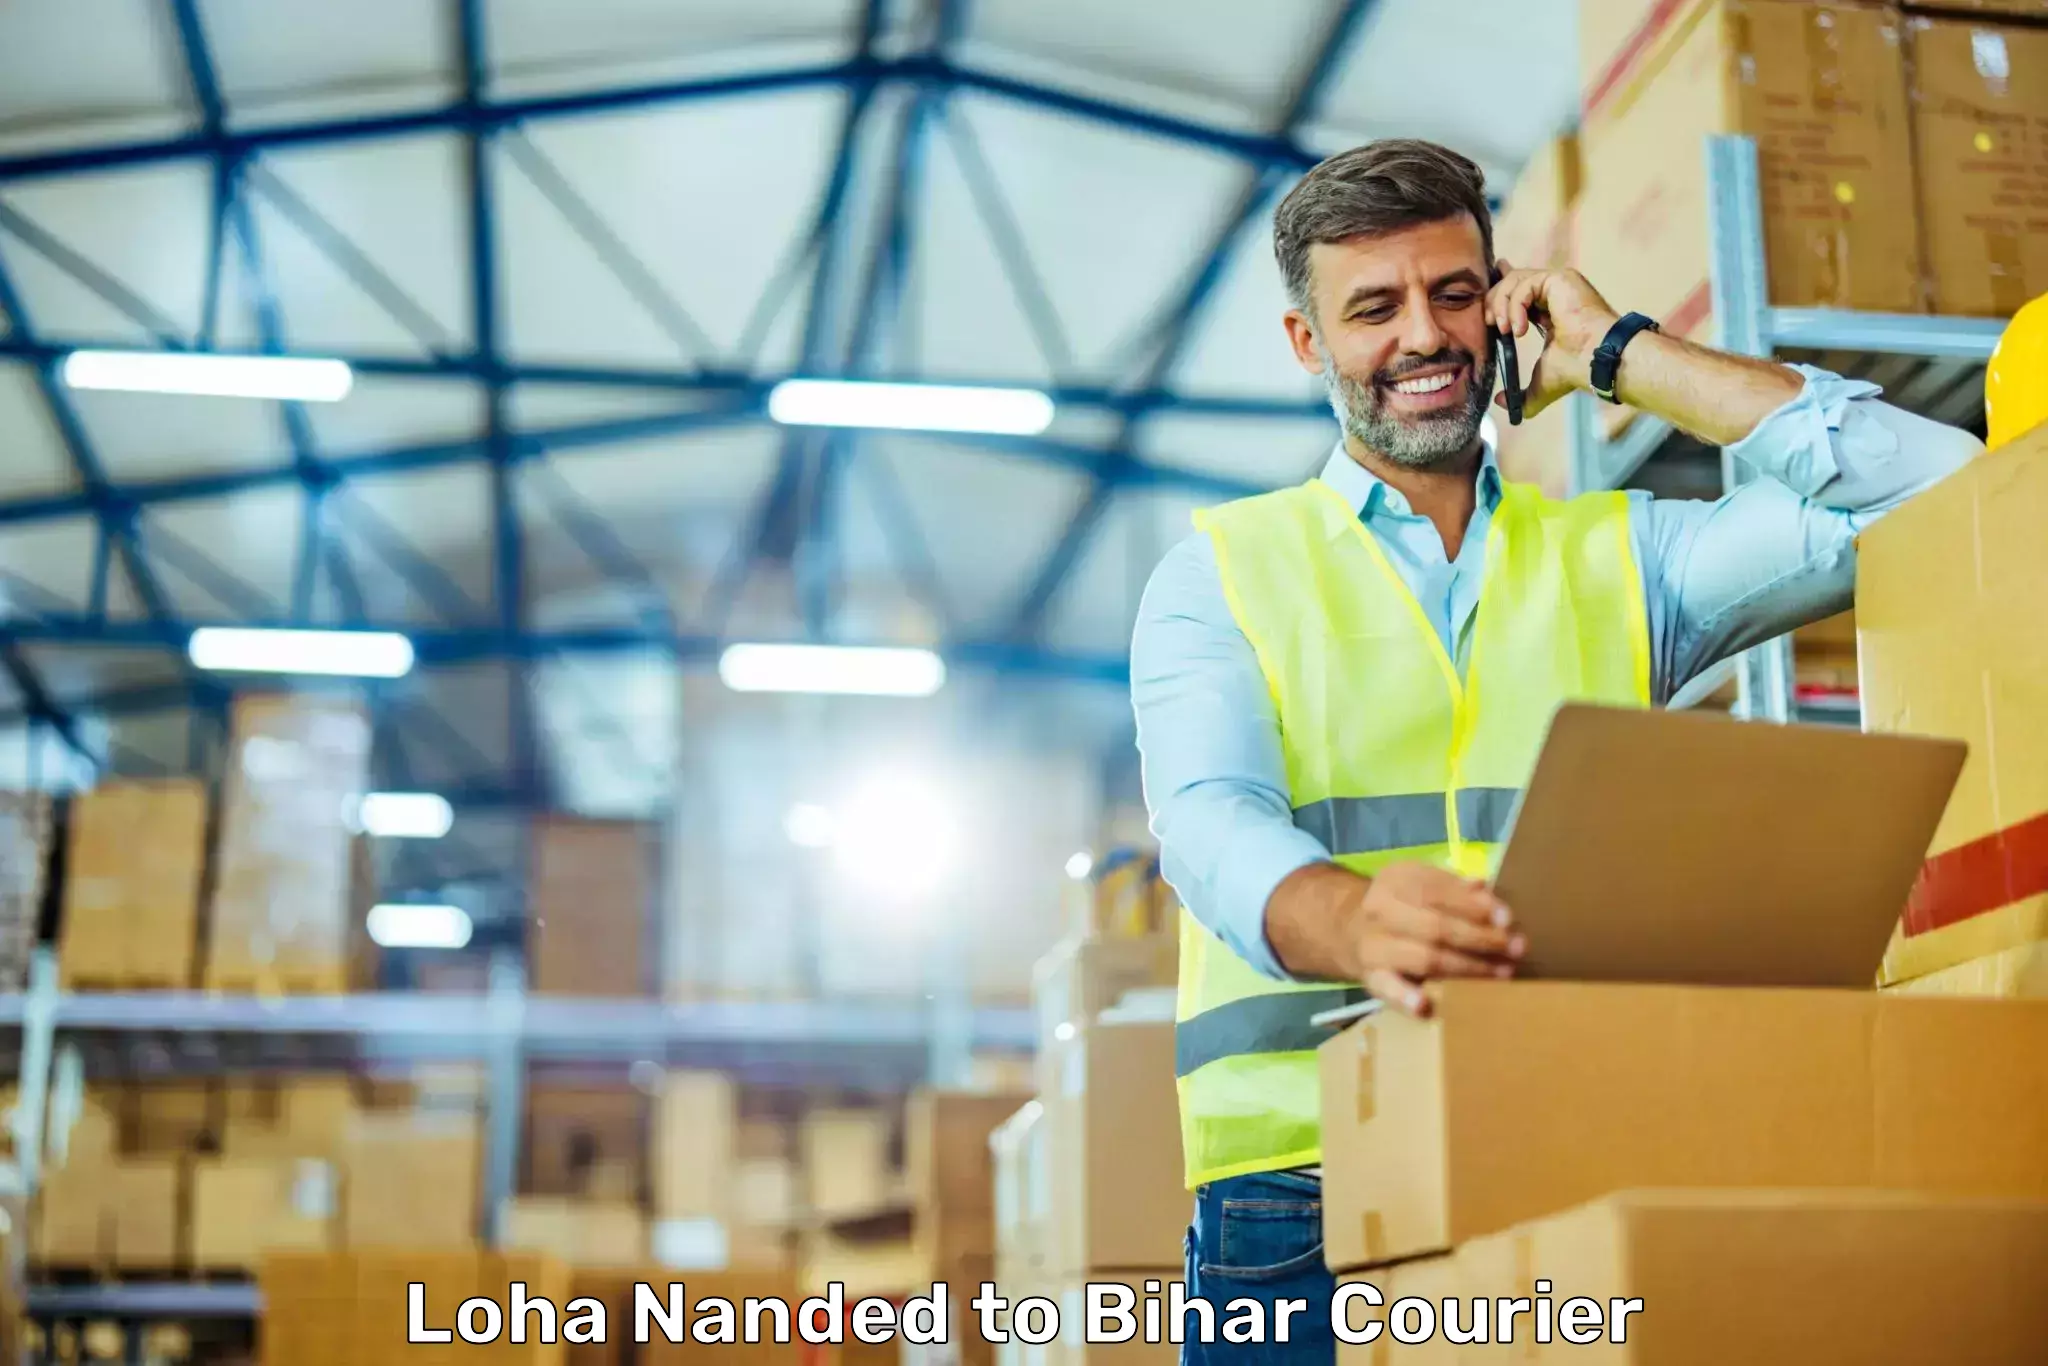 High-priority parcel service Loha Nanded to Saran